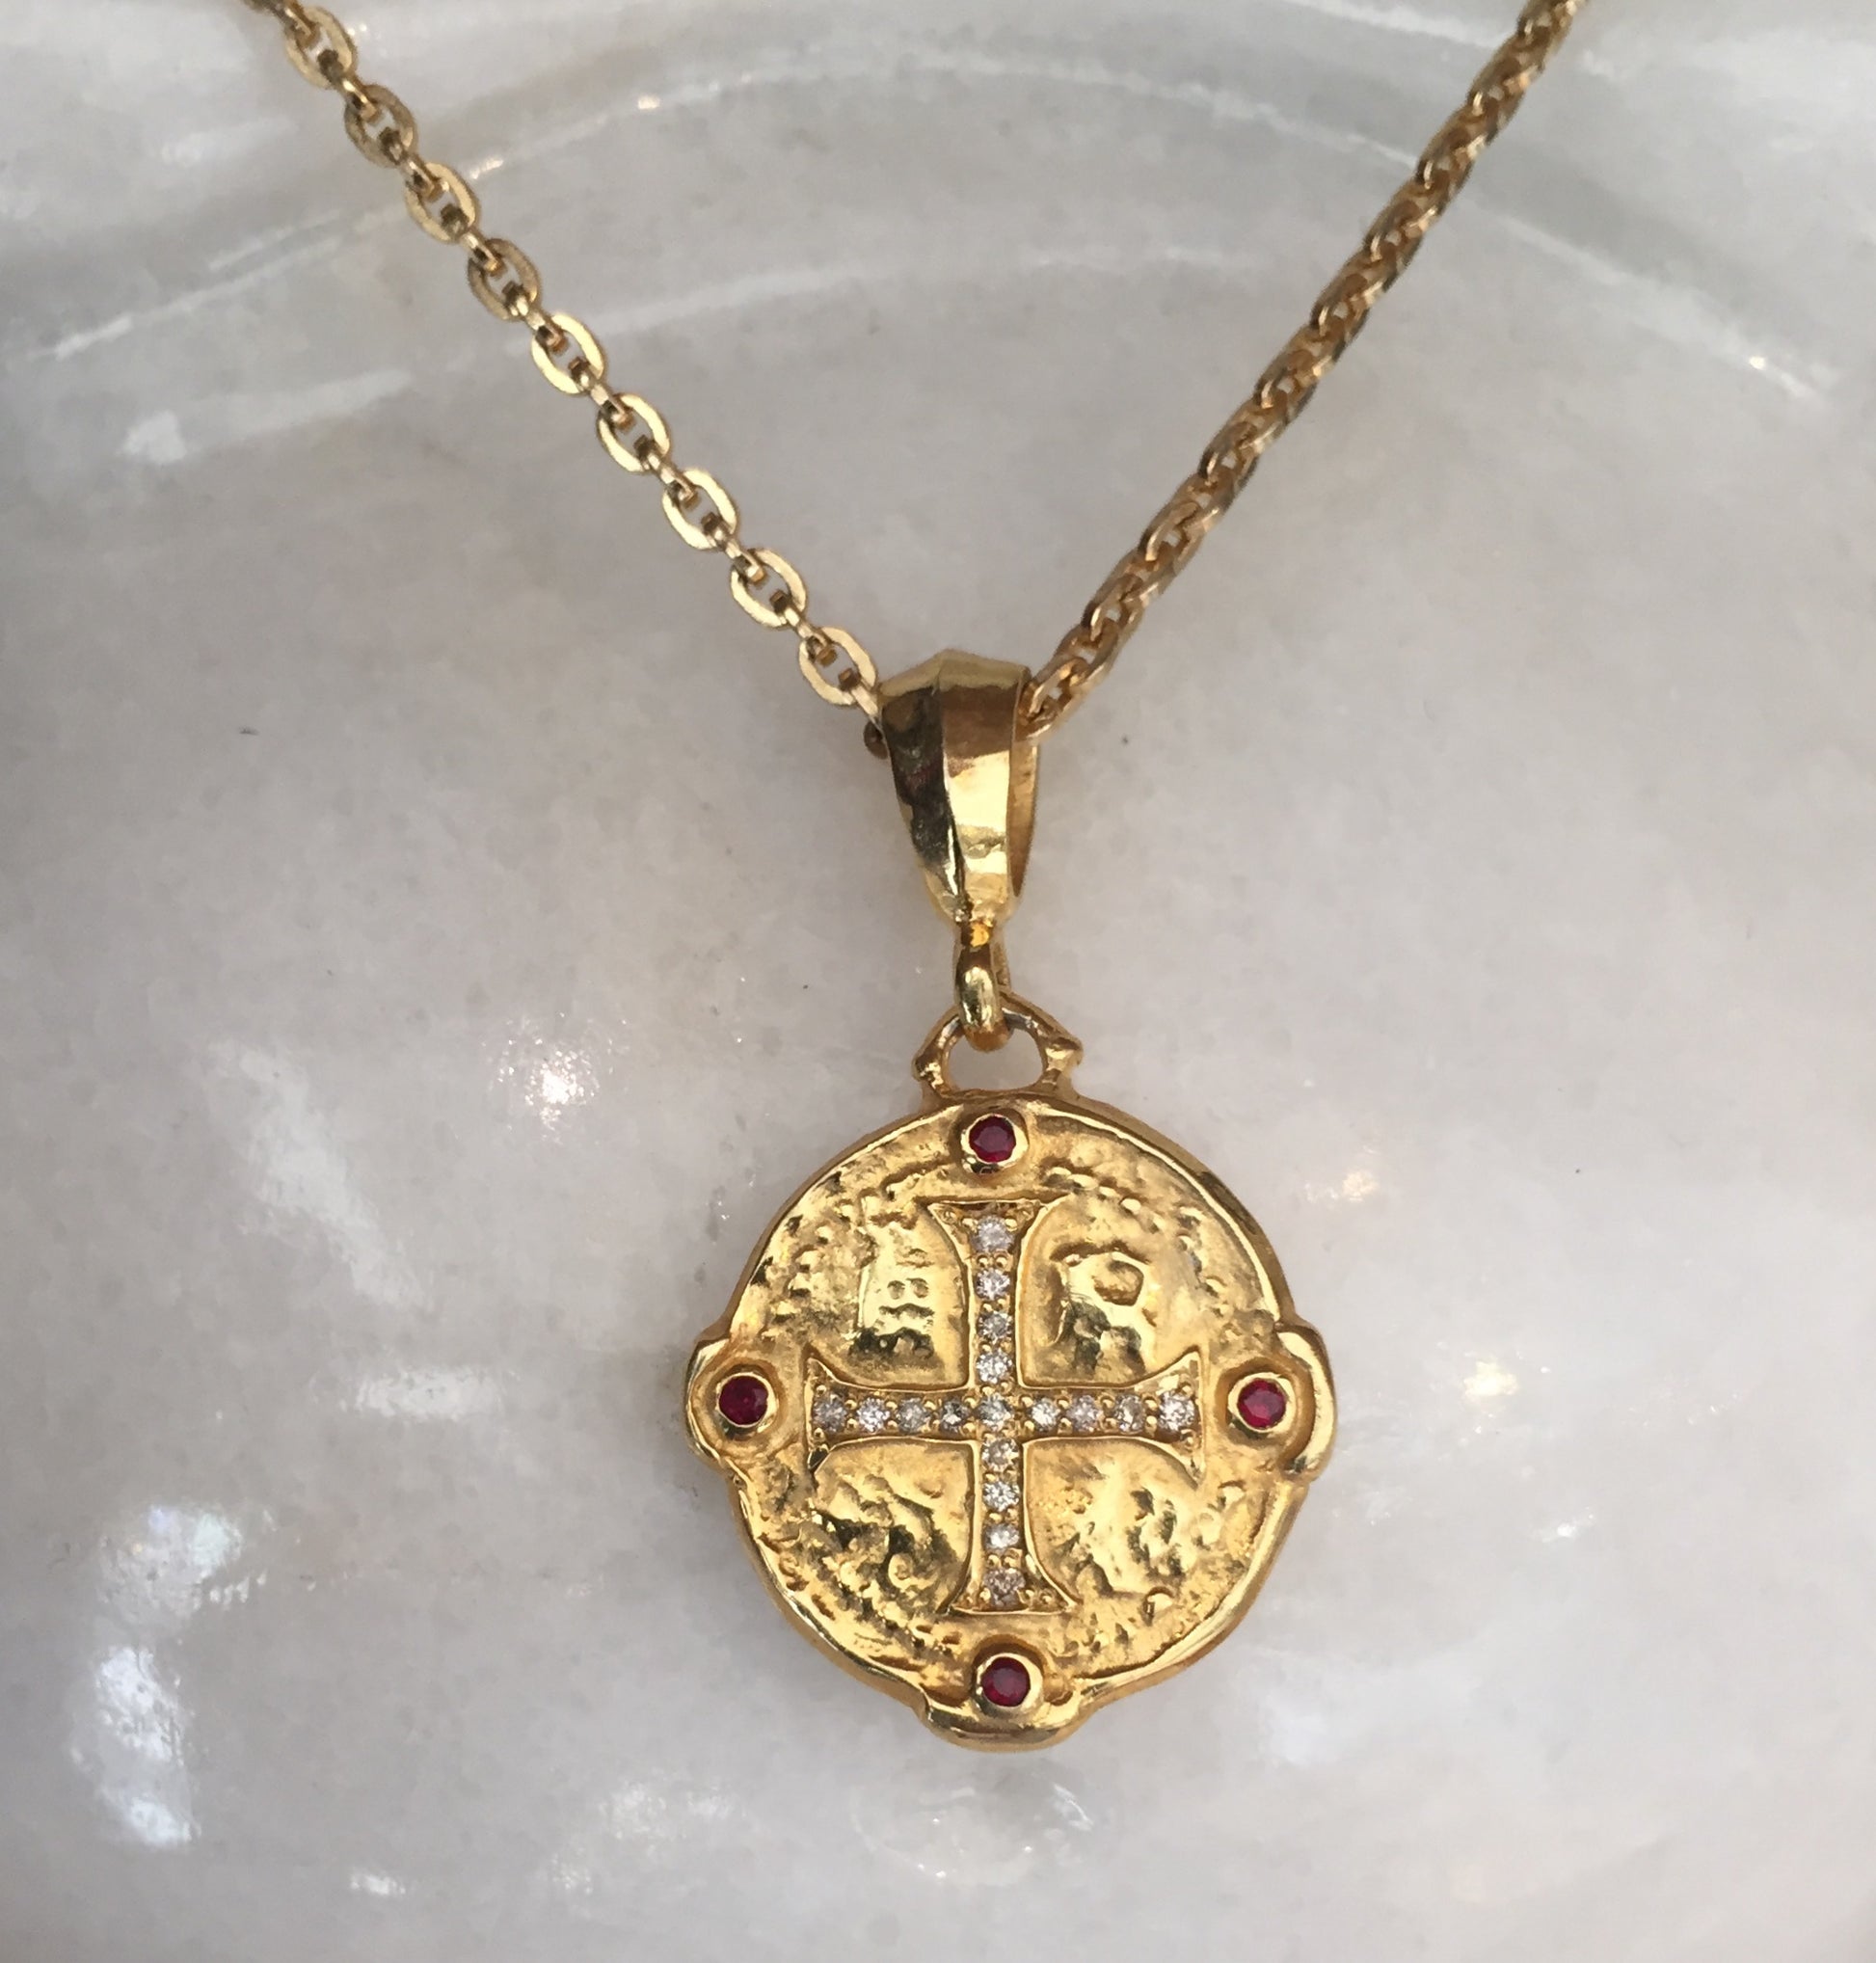 Necklace - Ancient Cross Medallion with Diamond & Rubies in silver +18k gold plated by Roman Paul